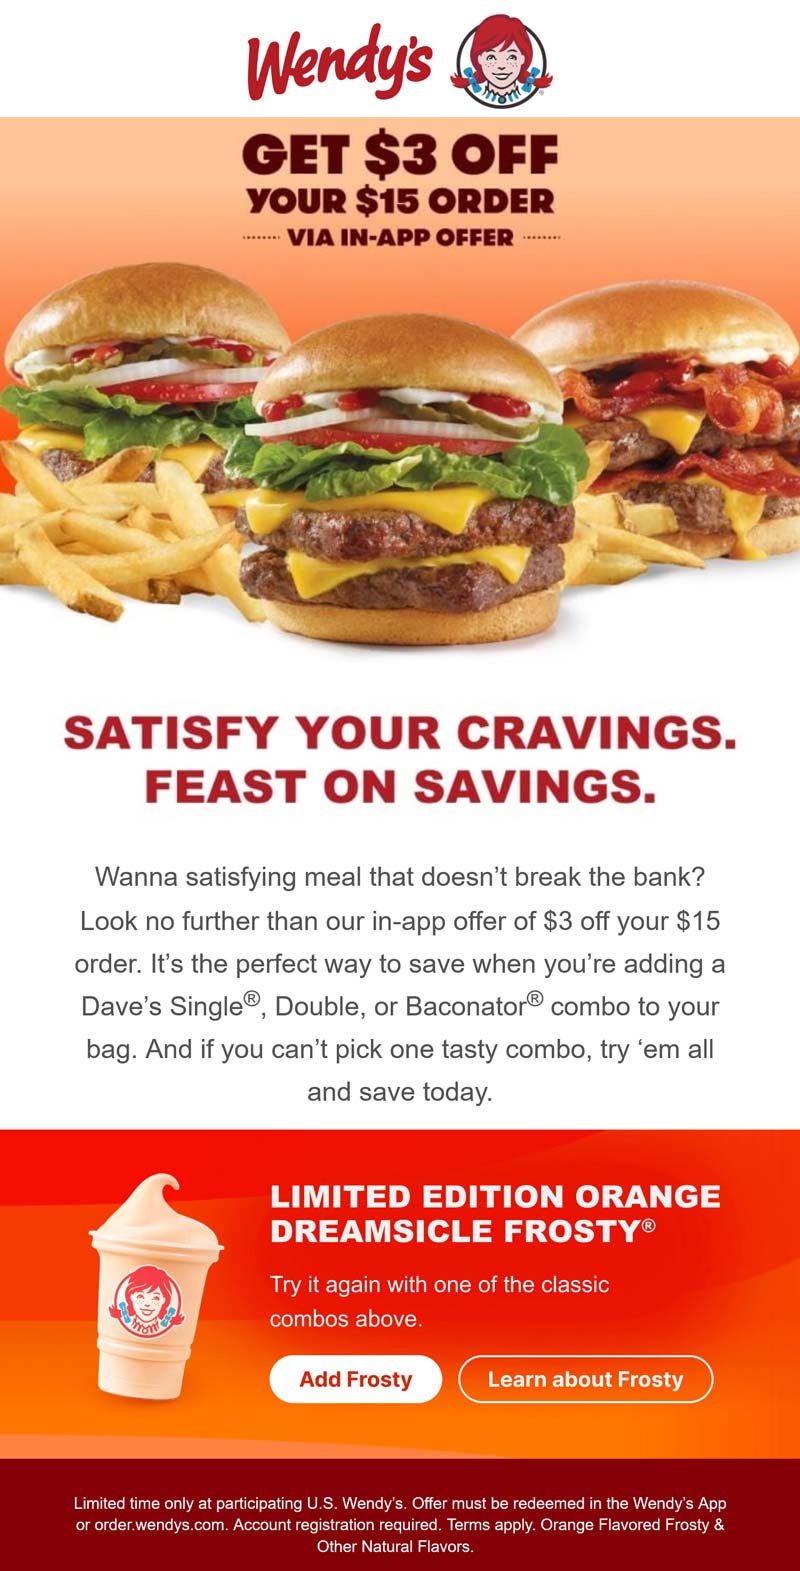 Wendys restaurants Coupon  $3 off $15 via mobile at Wendys restaurants #wendys 